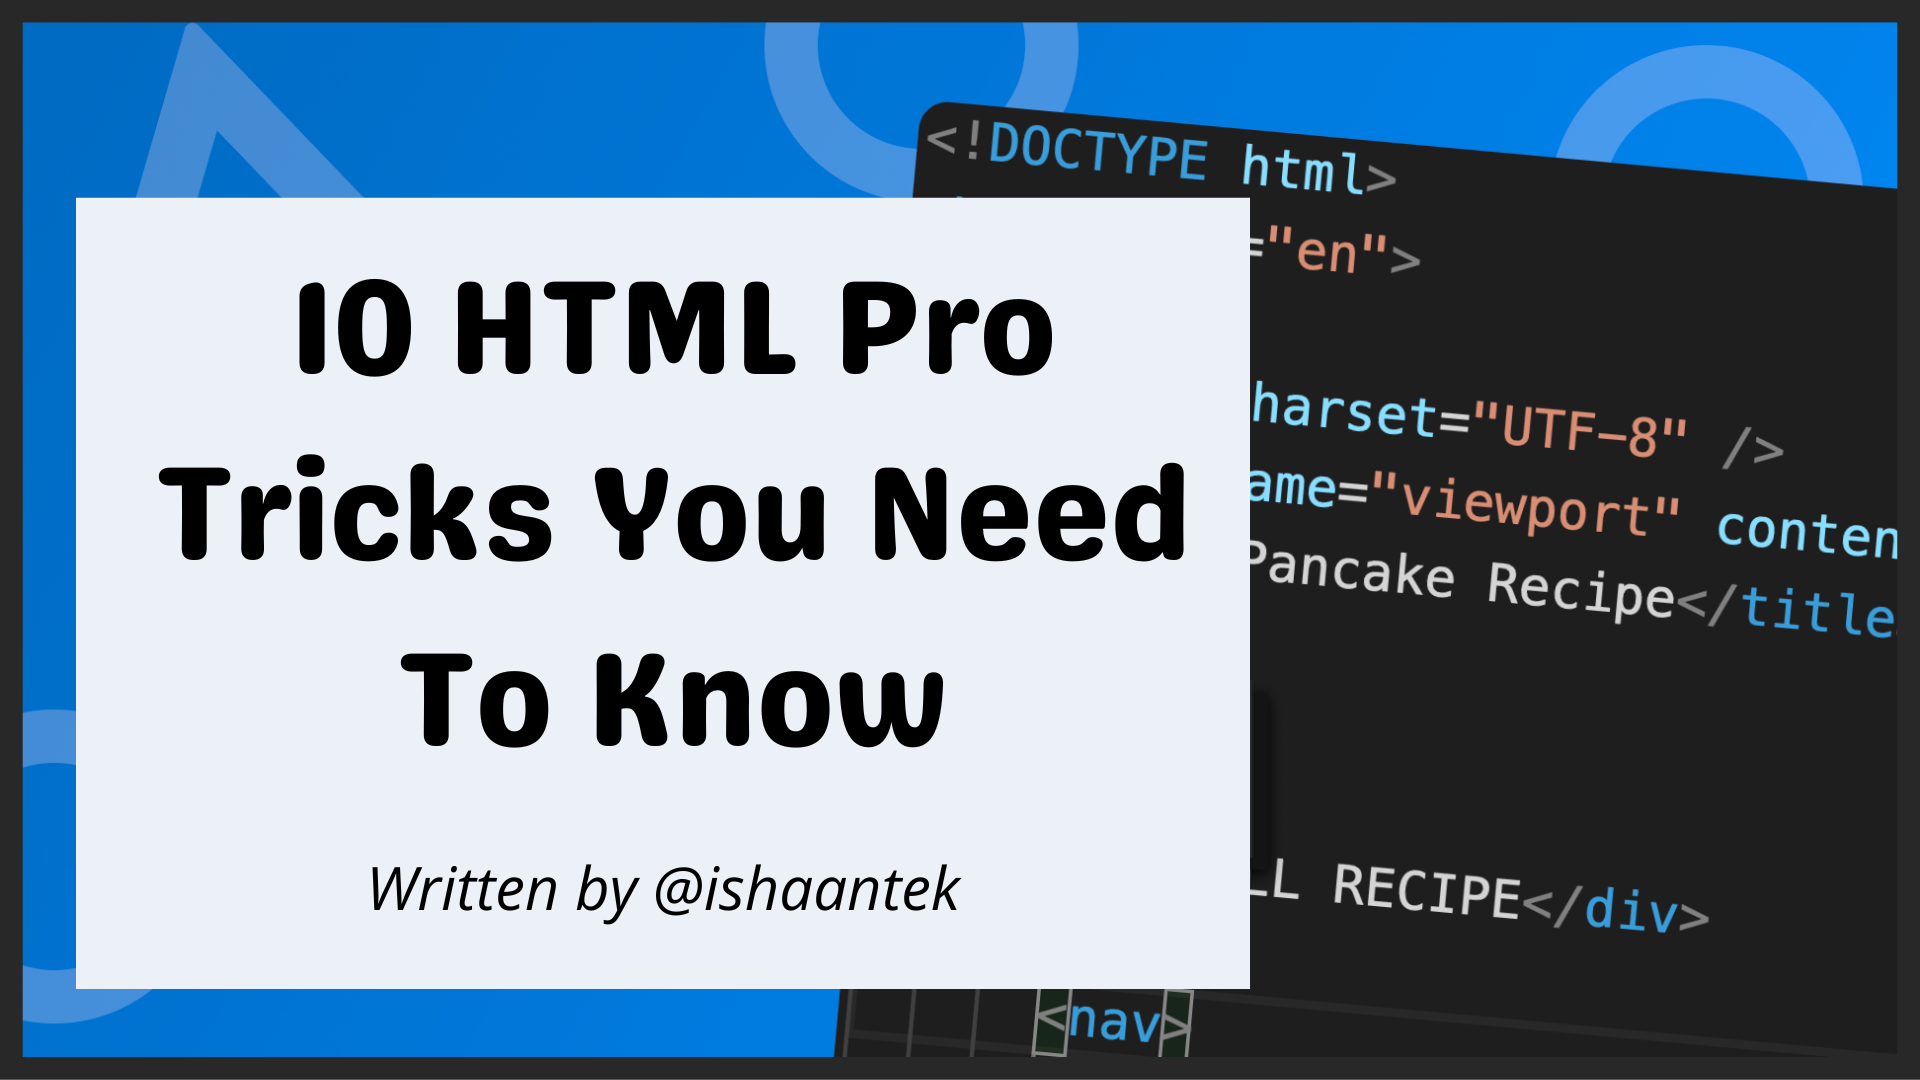 10 HTML Pro Tricks You Need To Know